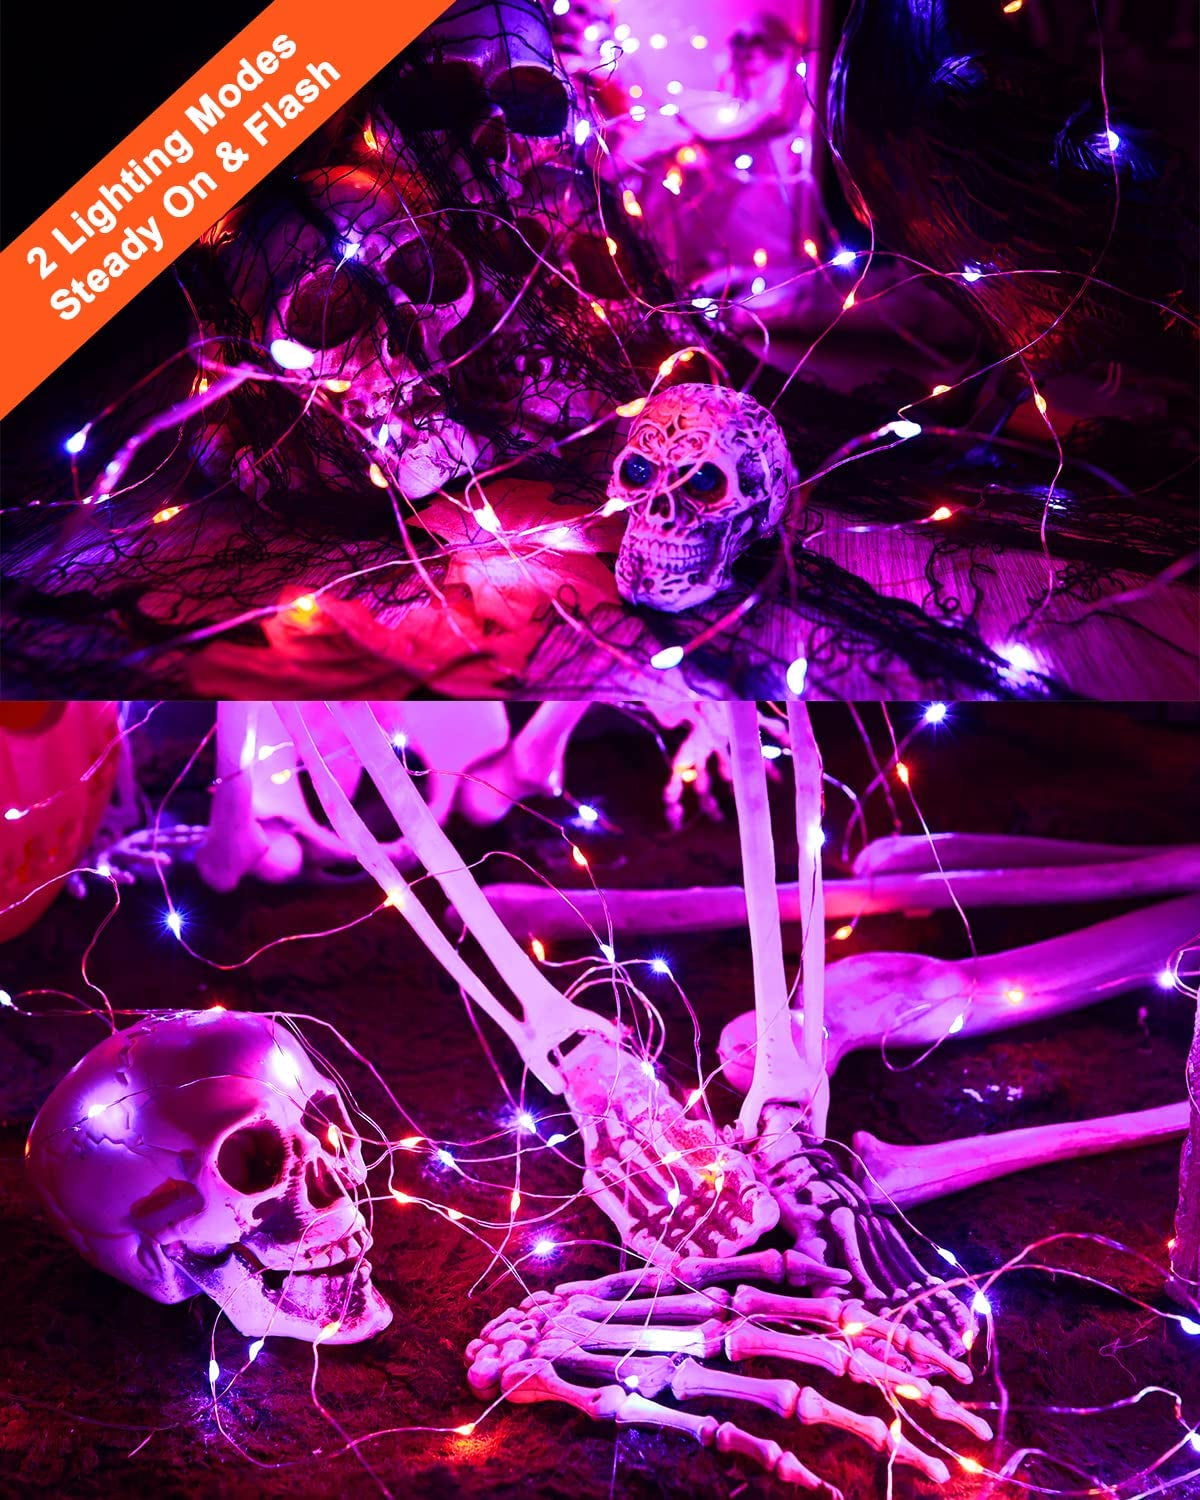 19.47Ft 60 LED Fairy Lights, 2 Modes Battery Lights, Indoor Silver Wire Purple Lights